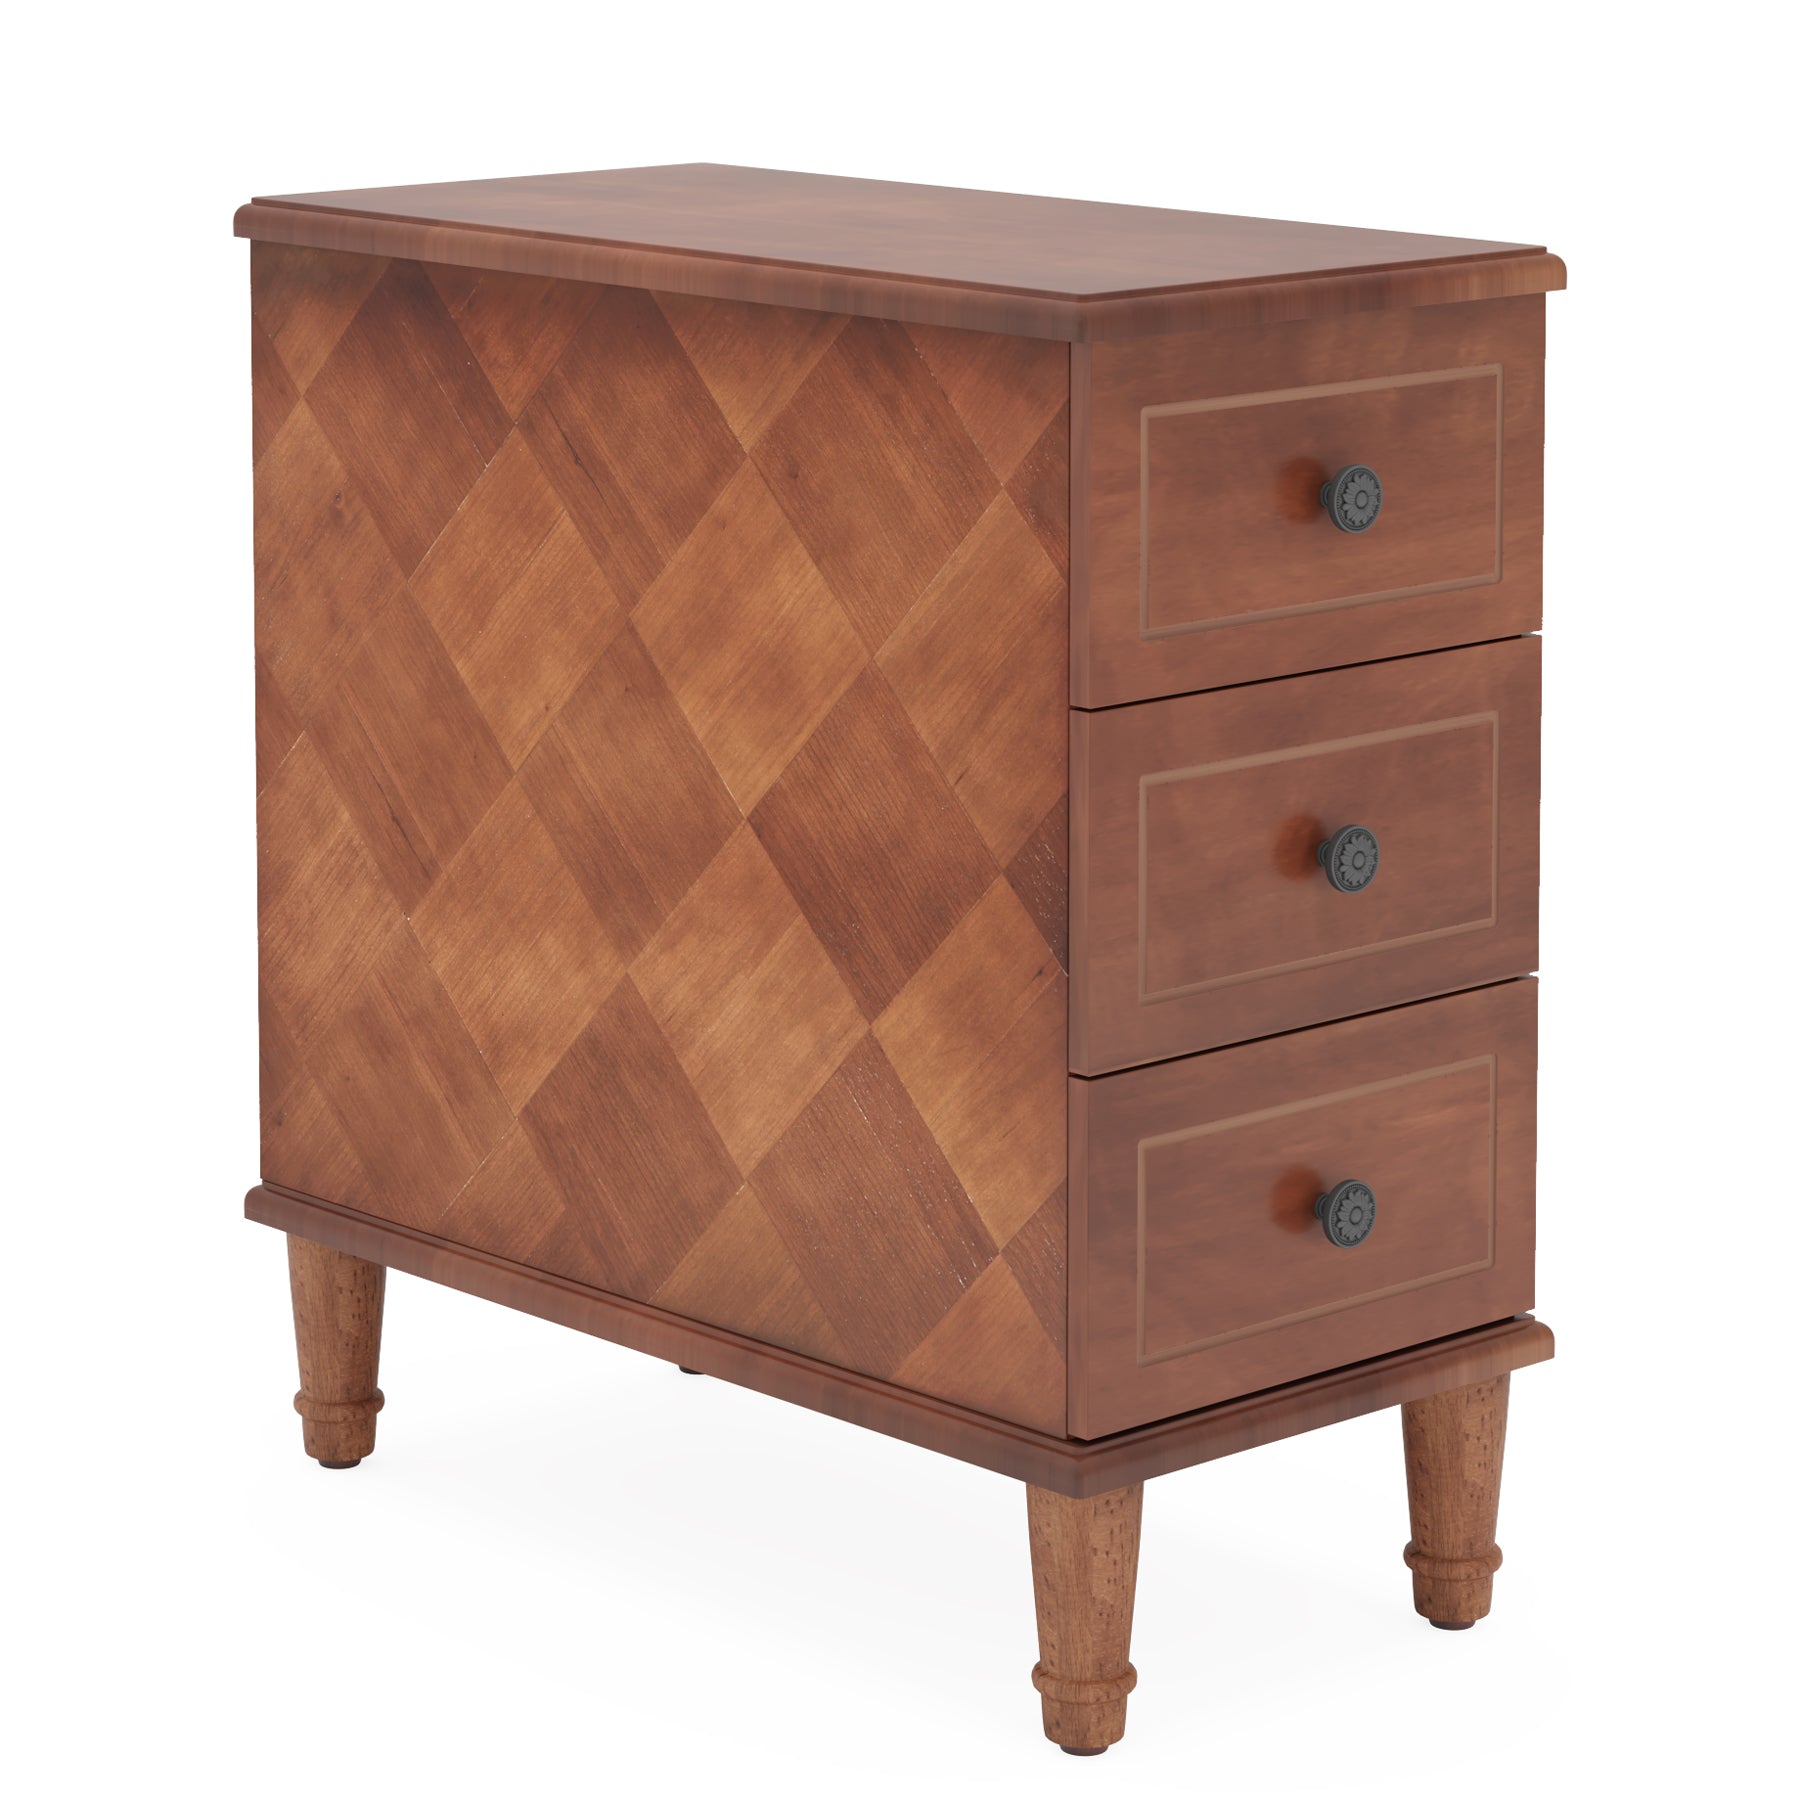 Wood Nightstand, Fully Assembled Narrow Side Table with 3 Drawers